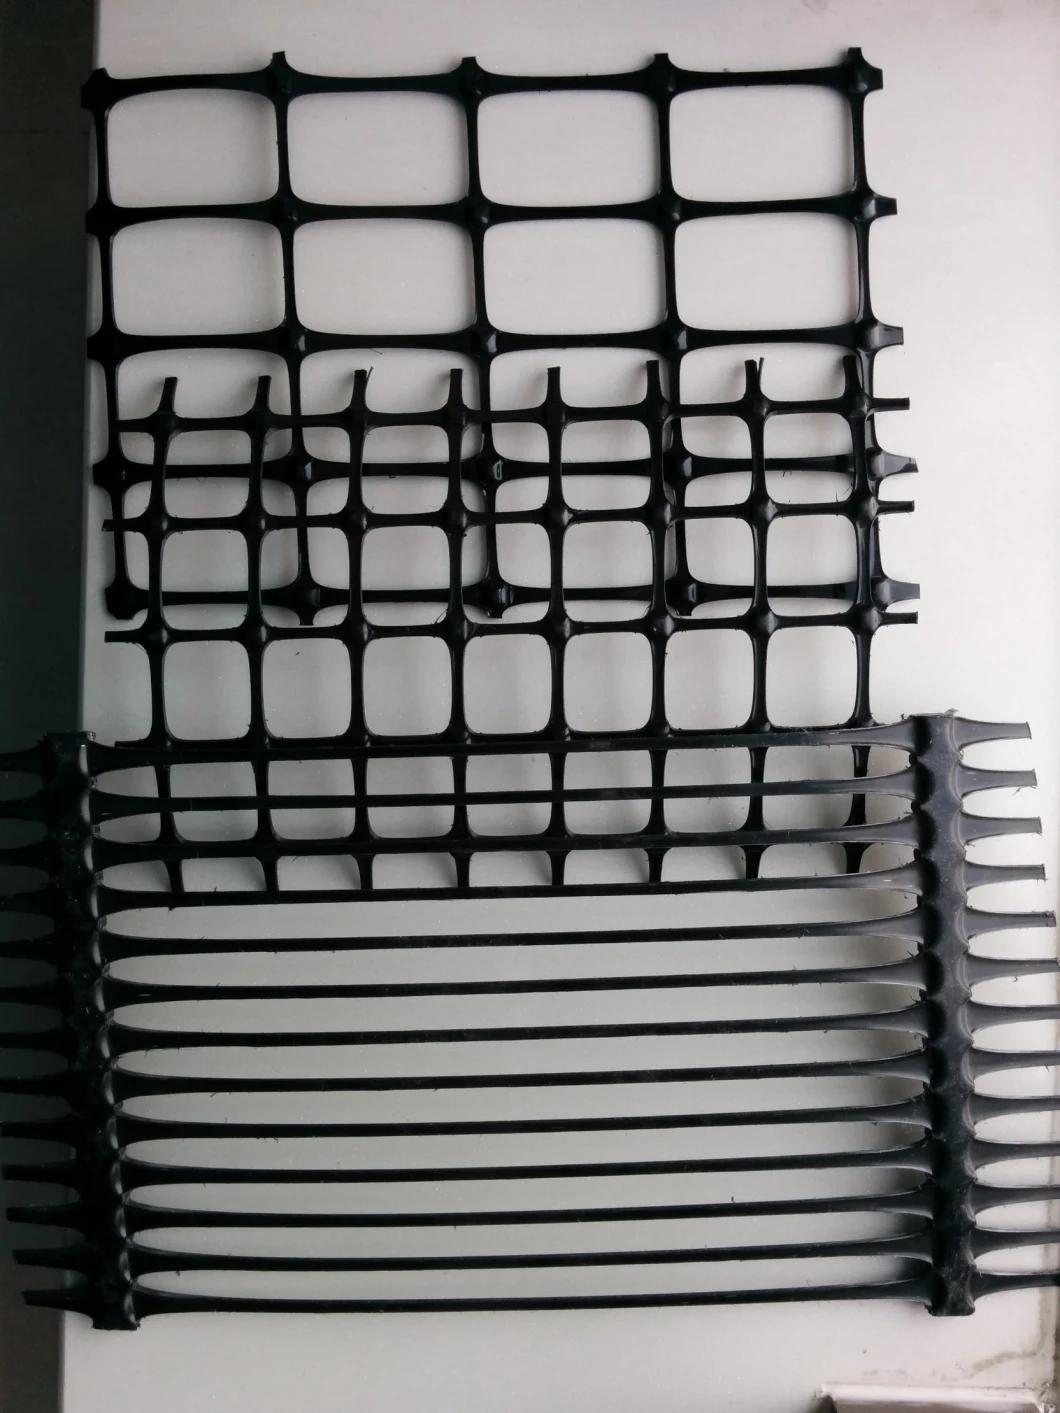 Plastic Extrusion Geogrid Machine Producing 6m Width Geogrid